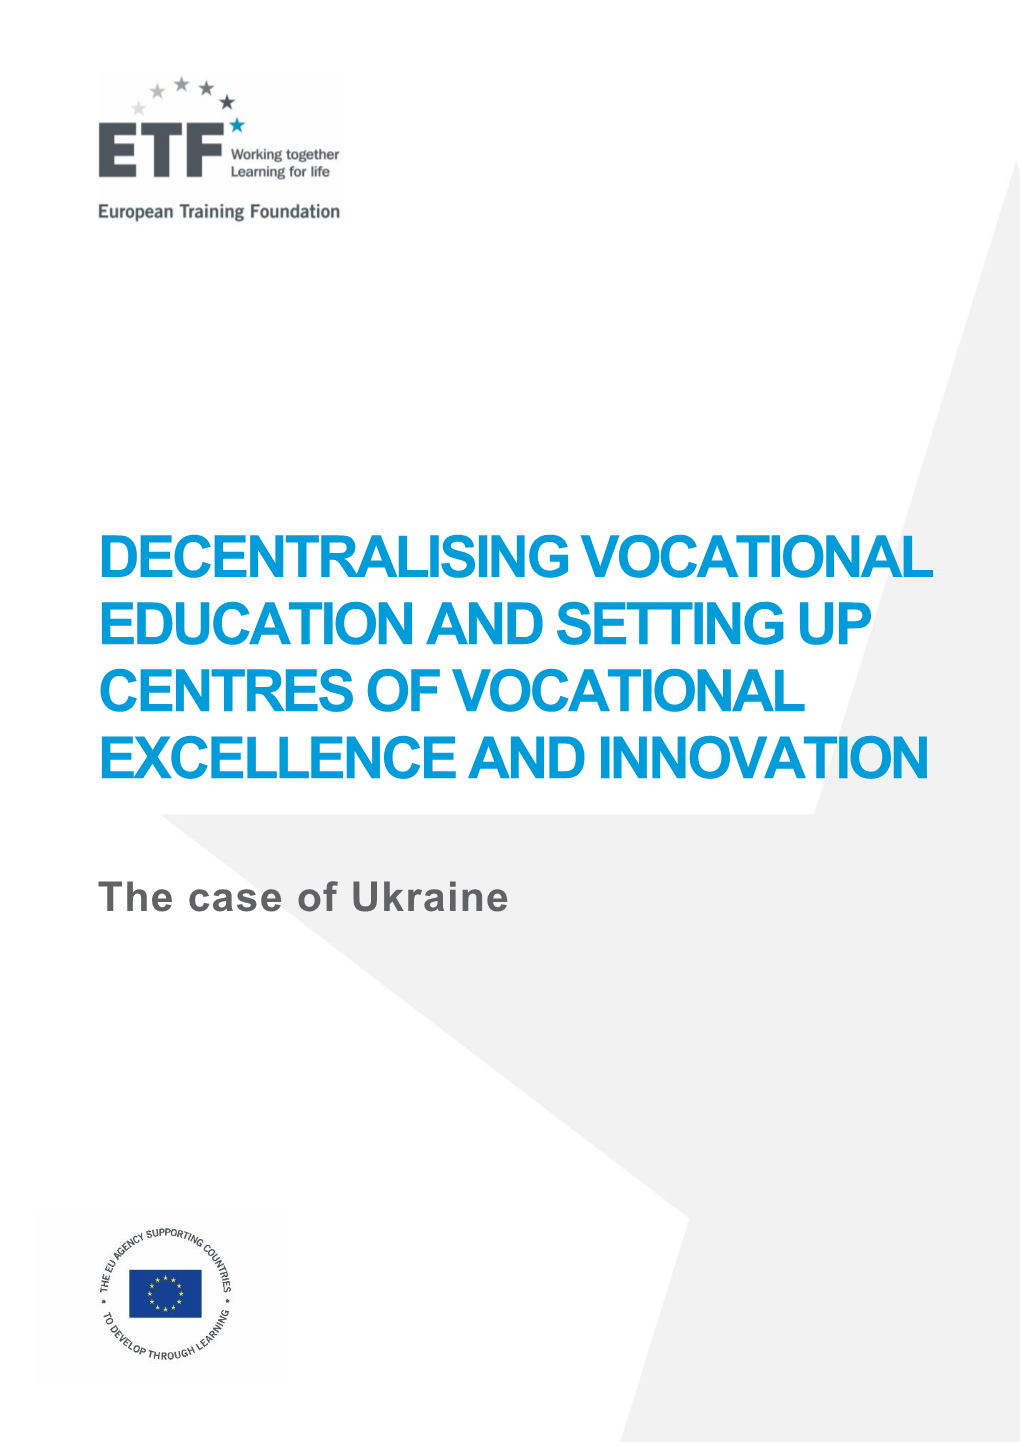 Decentralising Vocational Education and Setting up Centres of Vocational Excellence and Innovation